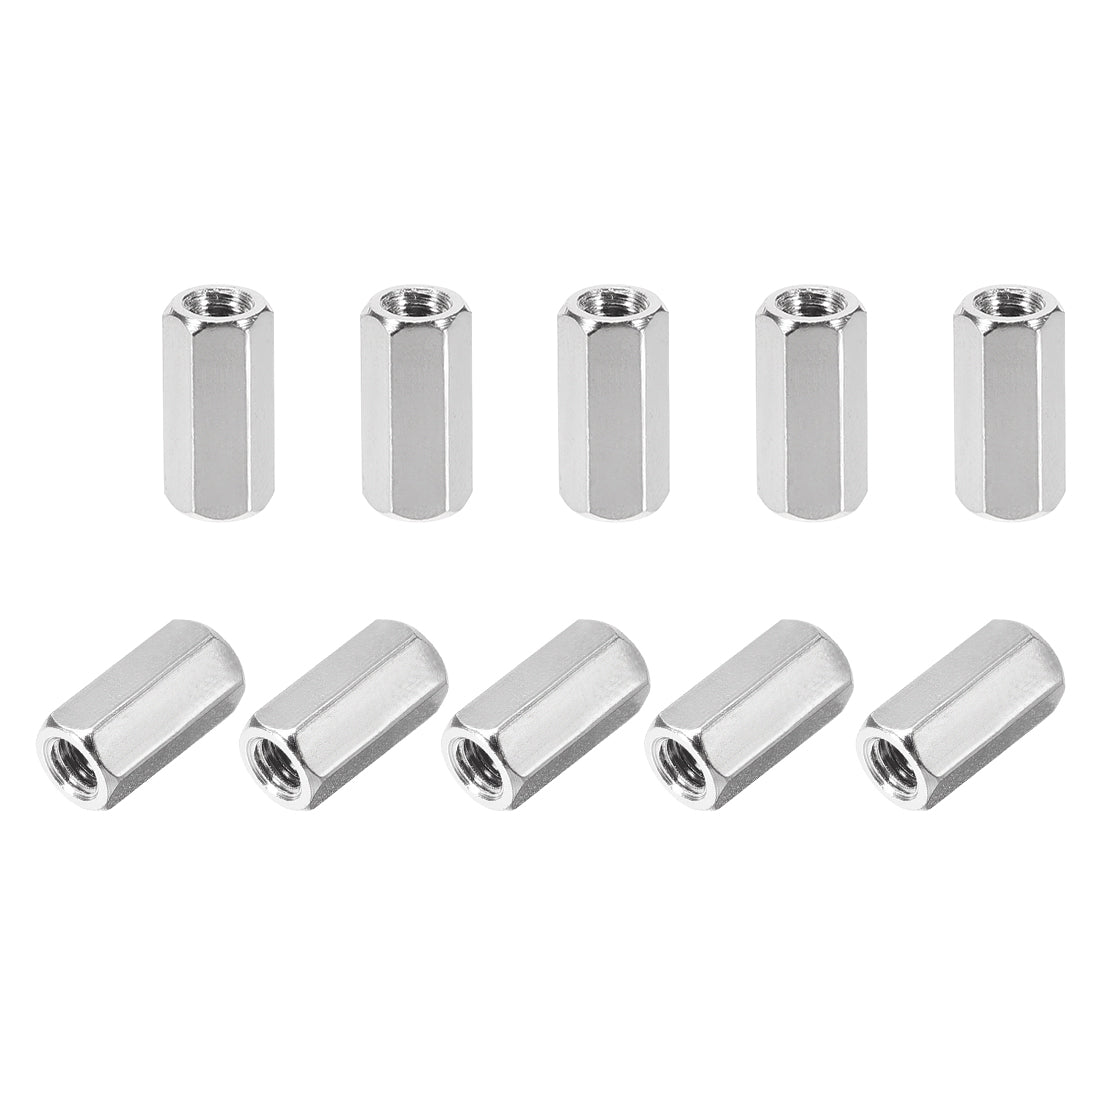 Uxcell Uxcell M4 x 40mm Female to Female Hex Nickel Plated Spacer Standoff 20pcs